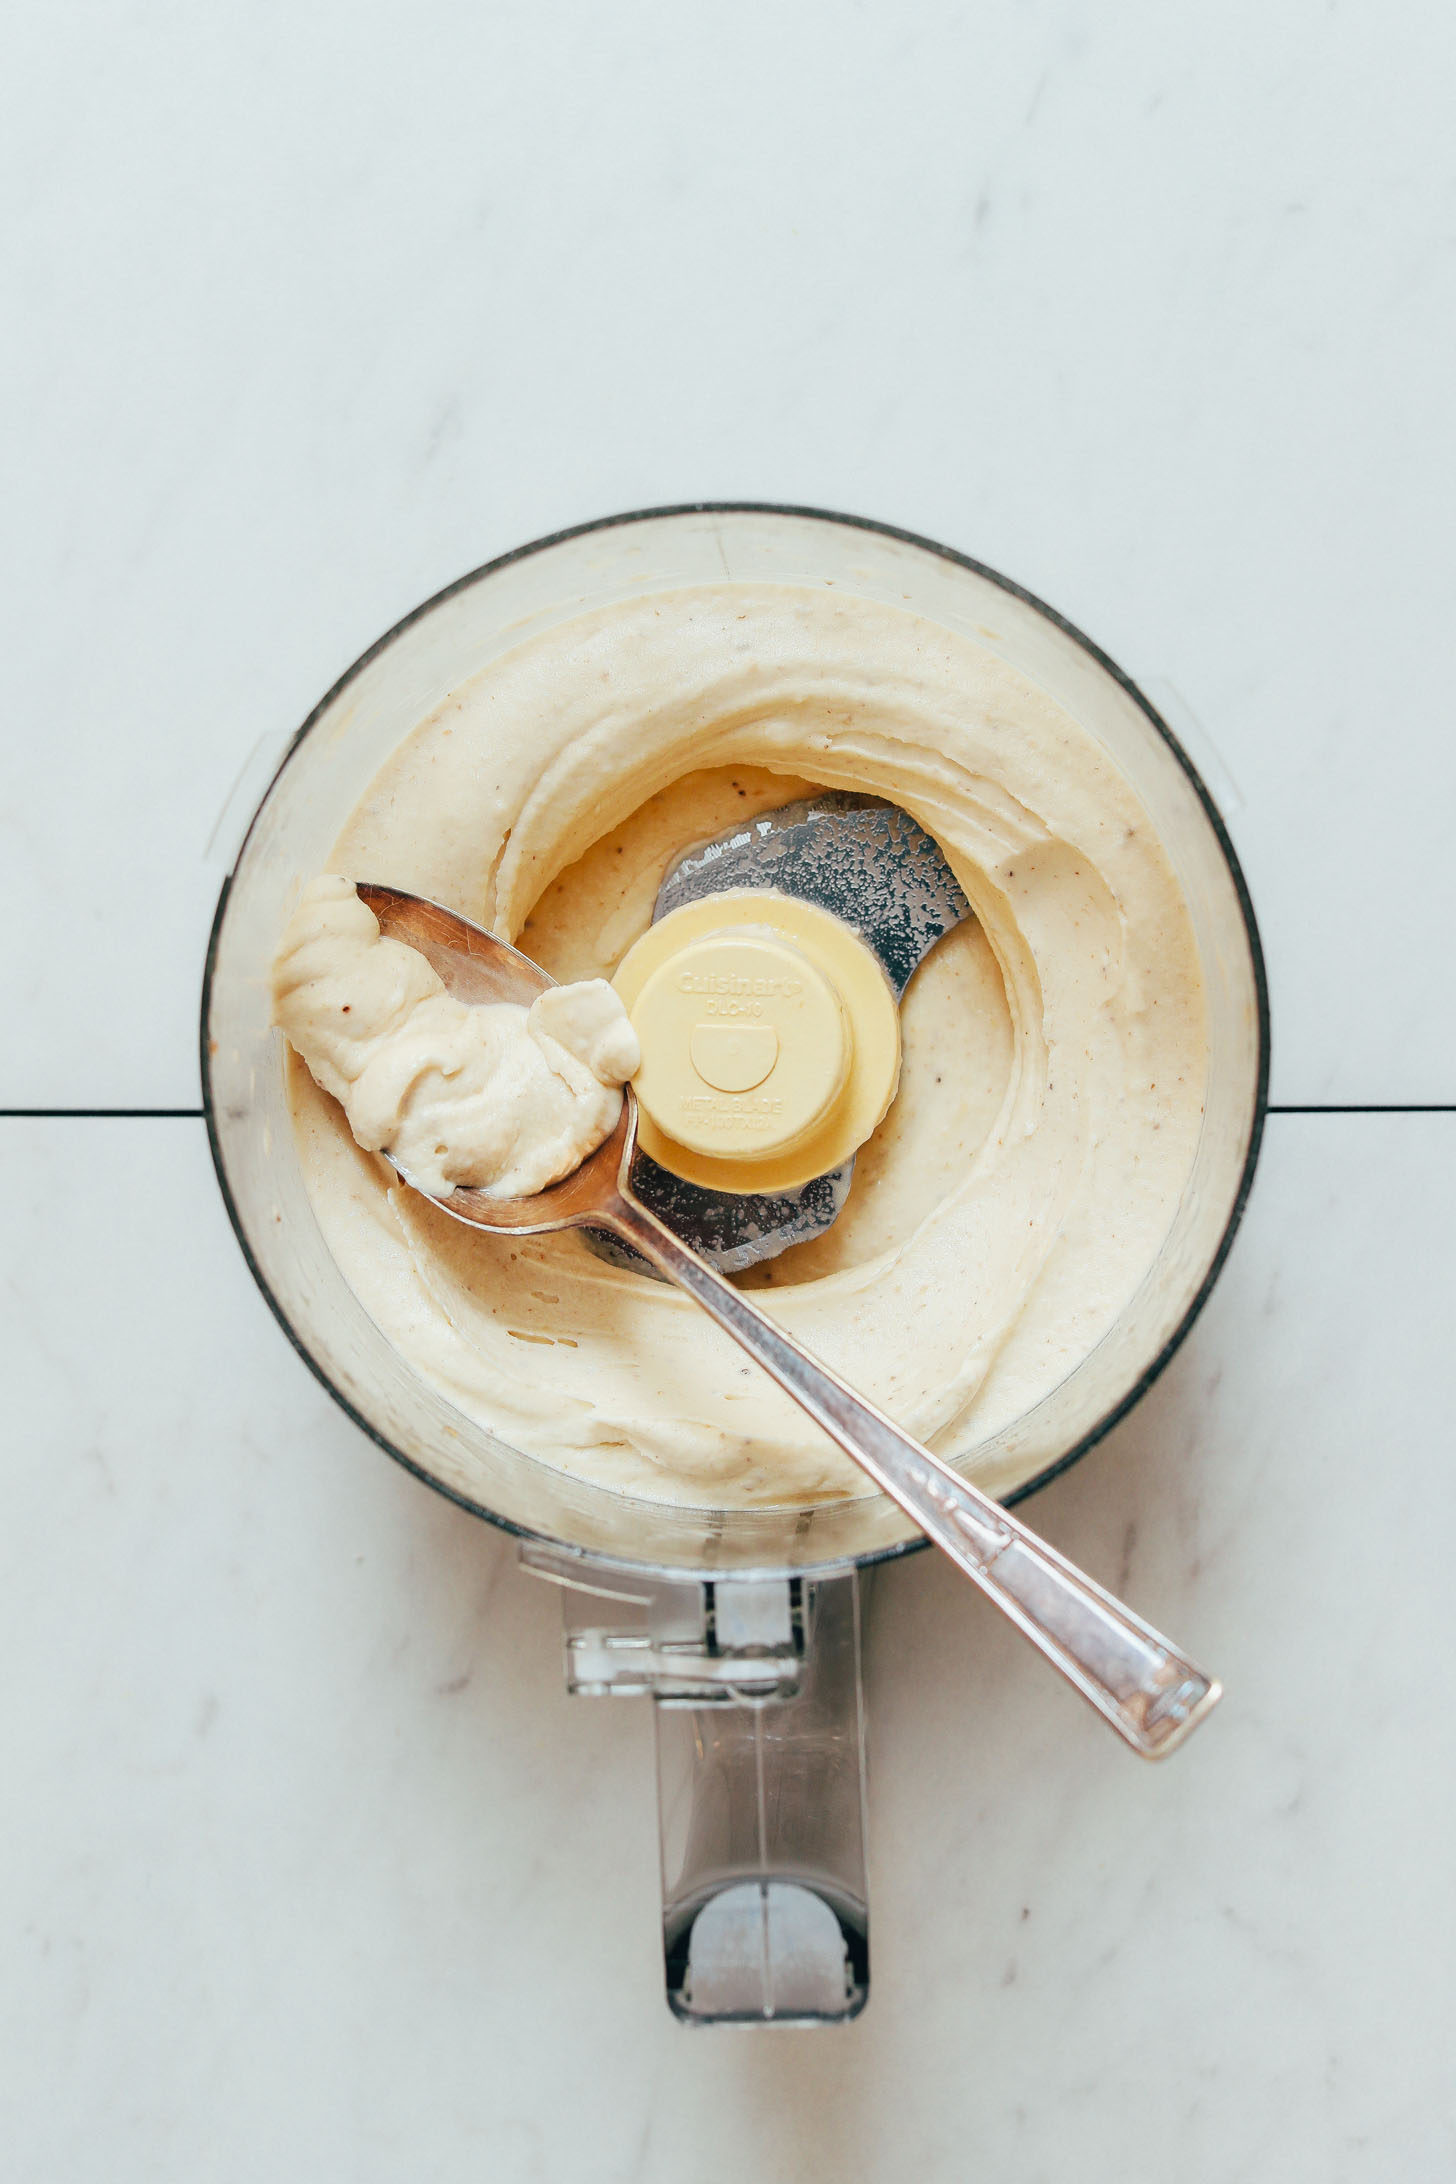 Spoon with a scoop of Banana Ice Cream in a food processor